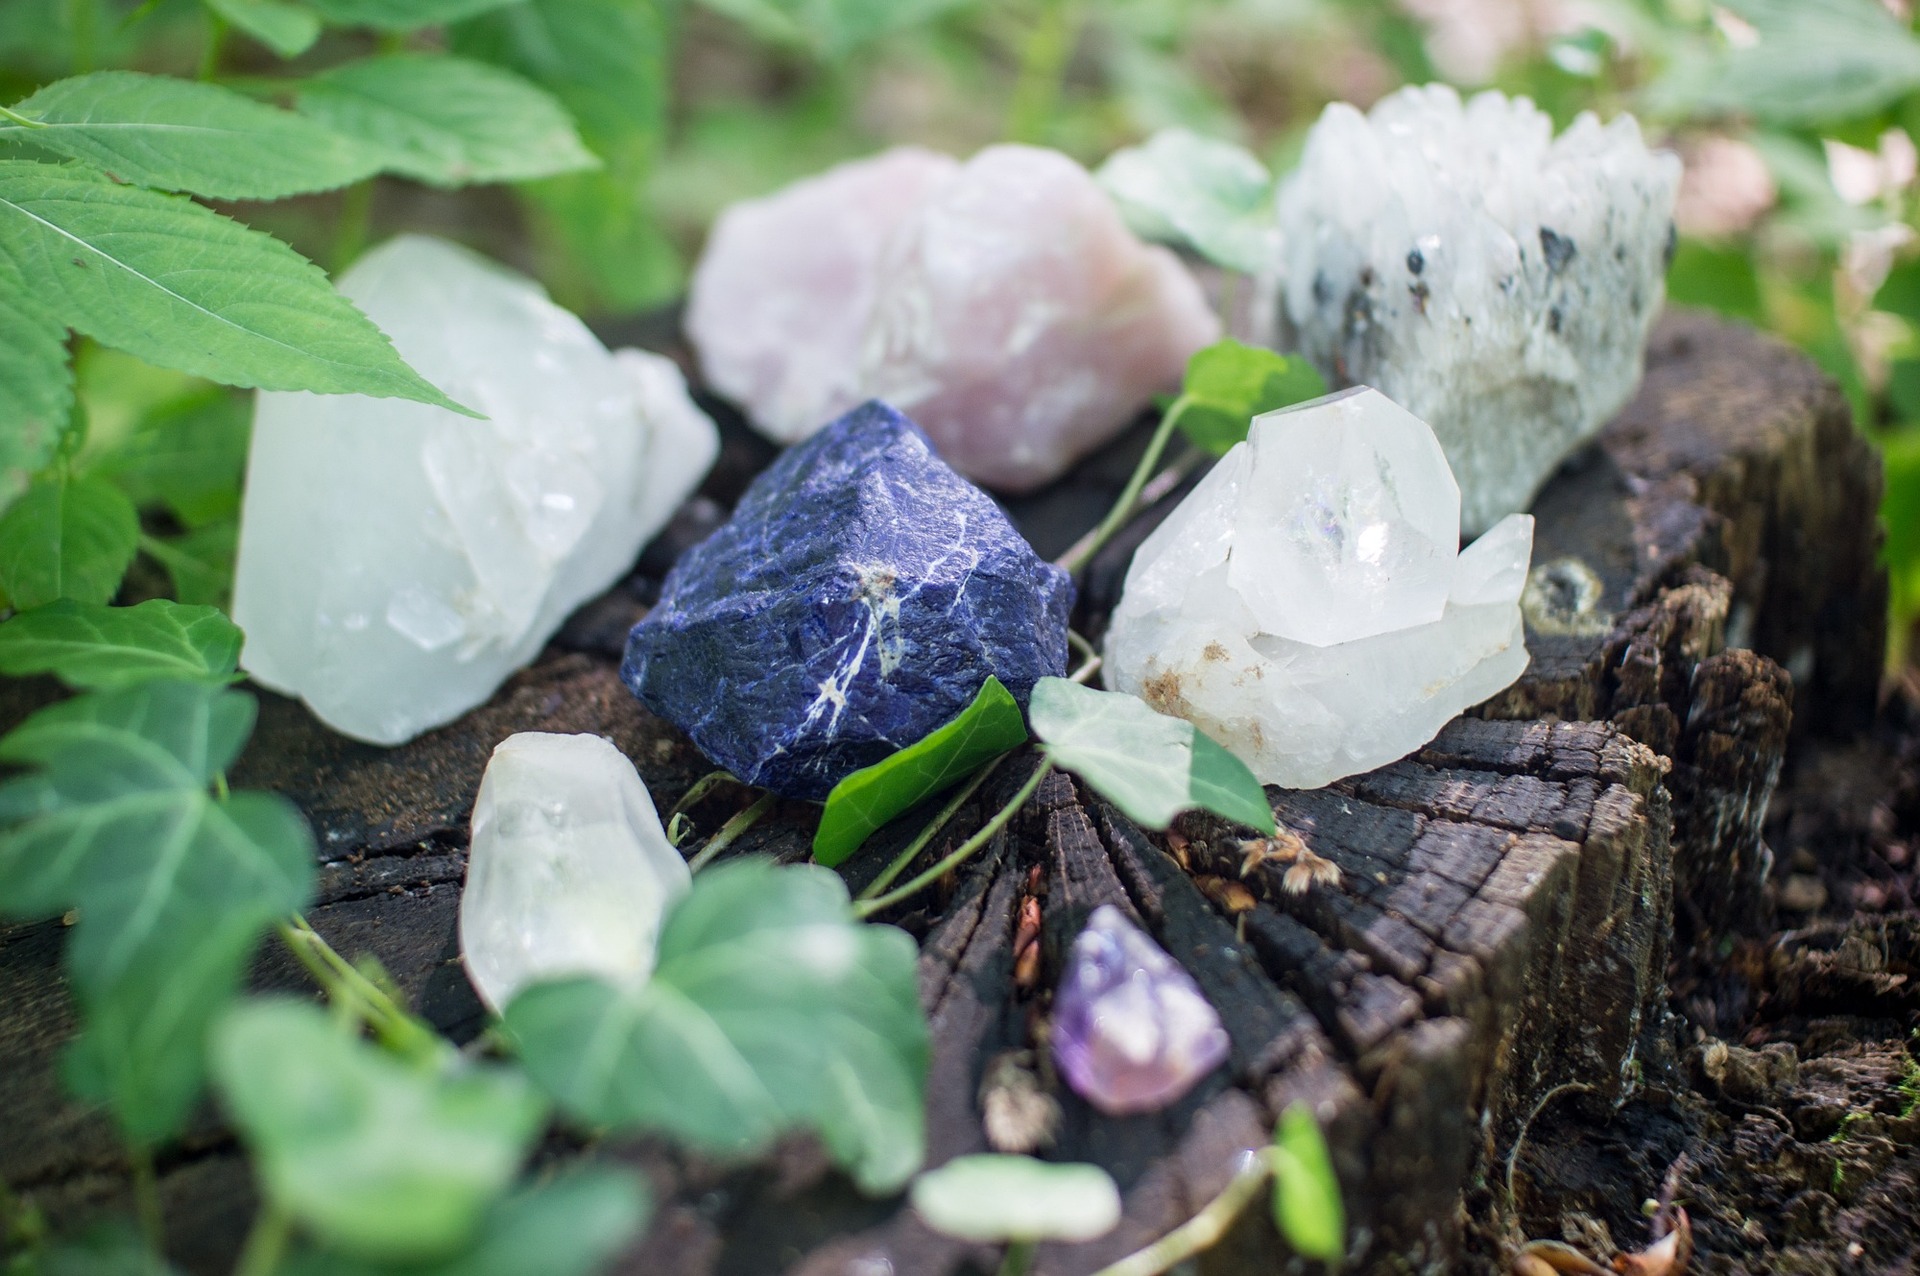 Crystals Magical Properties - Does Crystals Have Any Healing Essence?